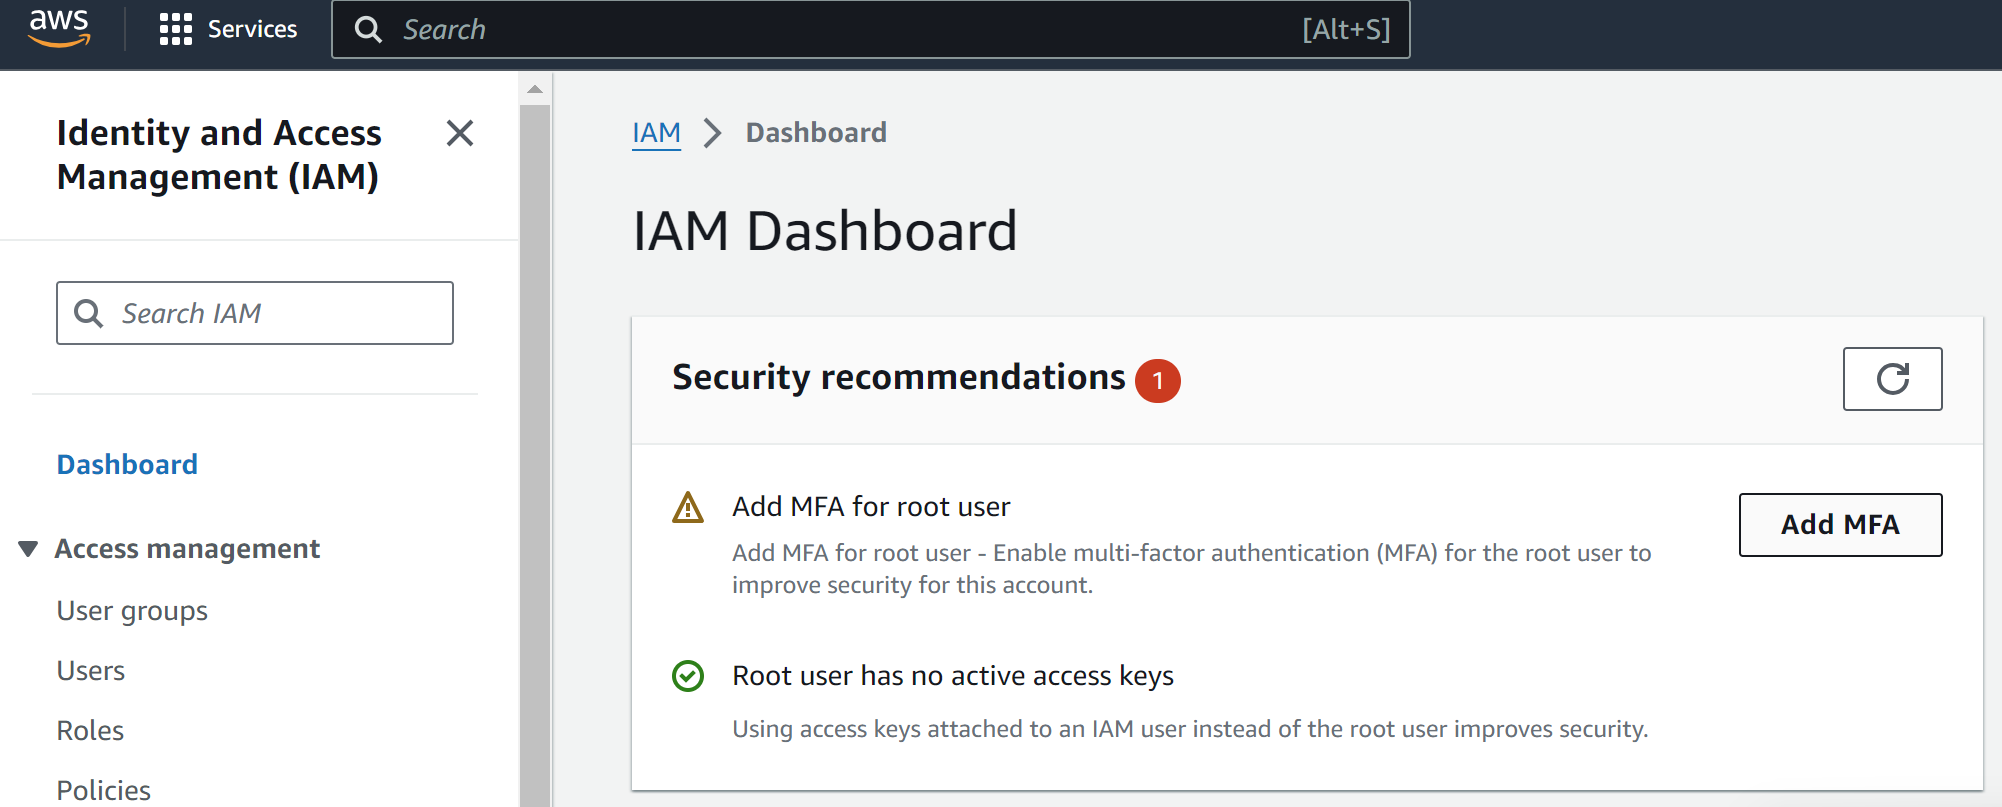 Screenshot of AWS IAM Dashboard displaying security recommendations, including a prompt to ‘Add MFA for root user’ and a note on the absence of active access keys for the root user, with navigation options for user groups, users, roles, and policies